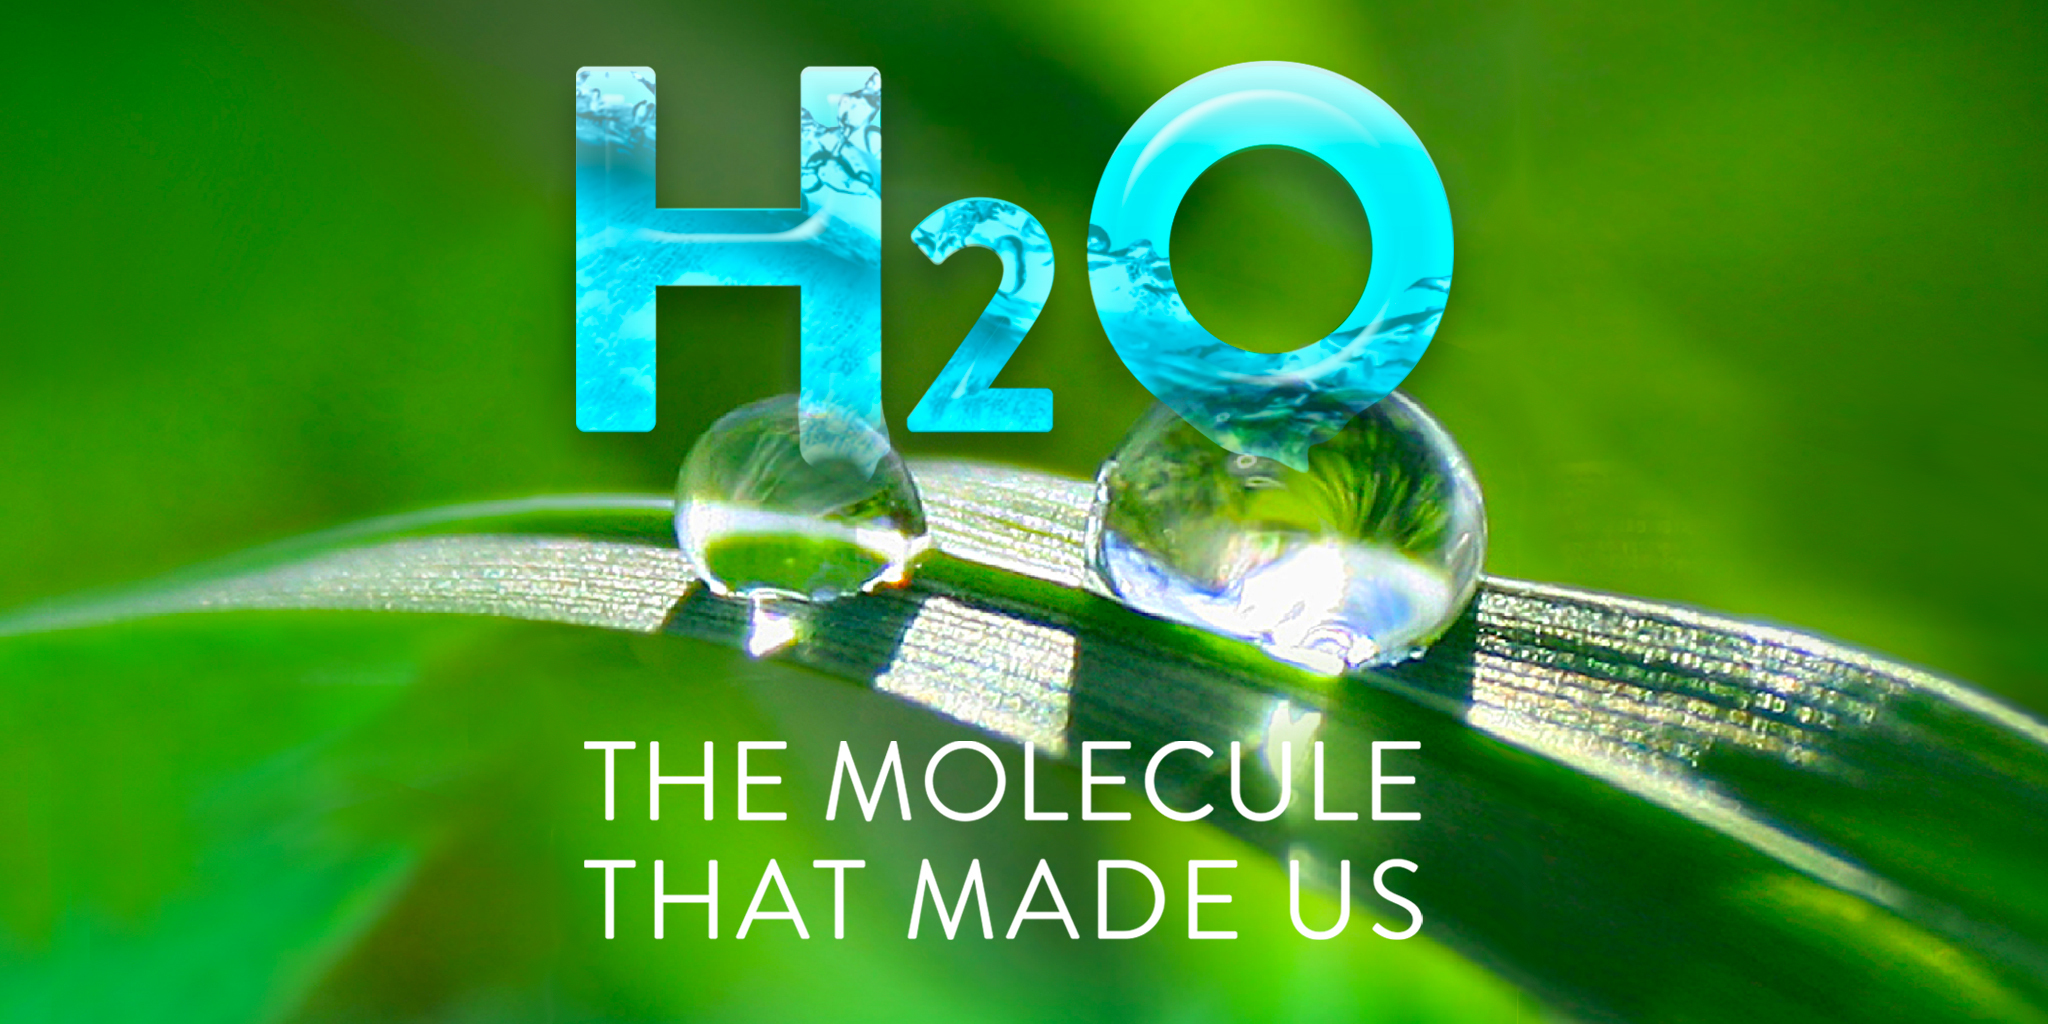 H2O: The Molecule That Made Us